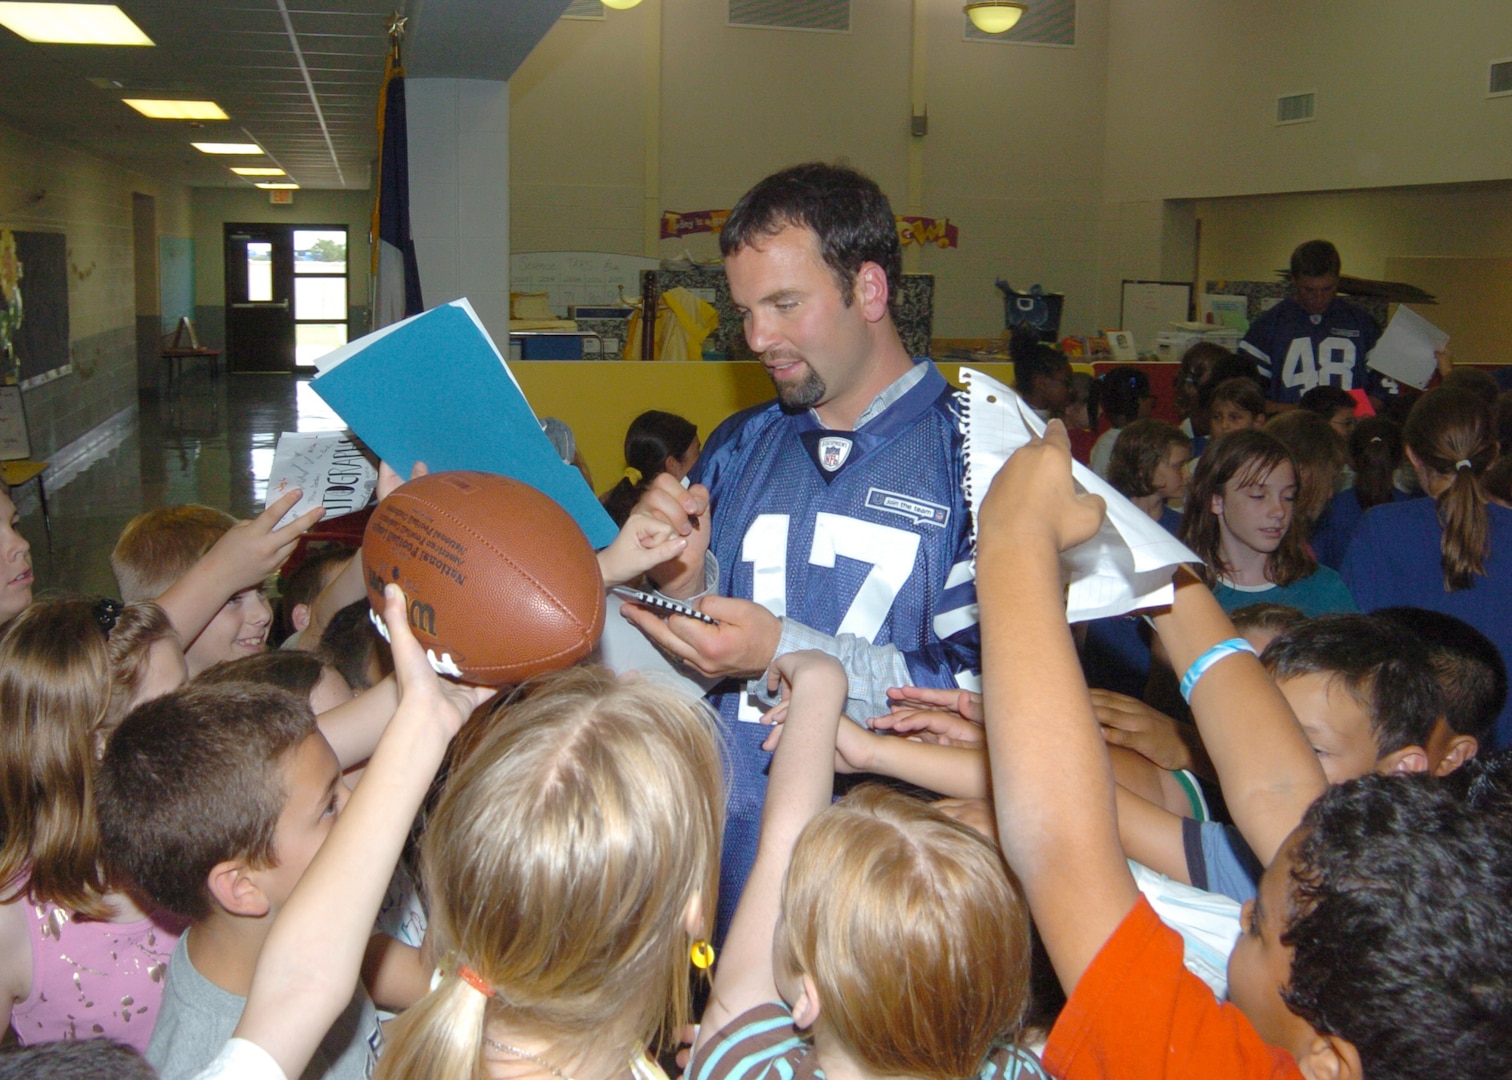 Students at Randolph Elementary School swamp Colts punter Hunter Smith with requests to autograph items during a visit to the base.  Colts players visited Randolph Air Force Base, enhancing relations between the team and the Air Force.  (U.S. Air Force photo by David Terry)